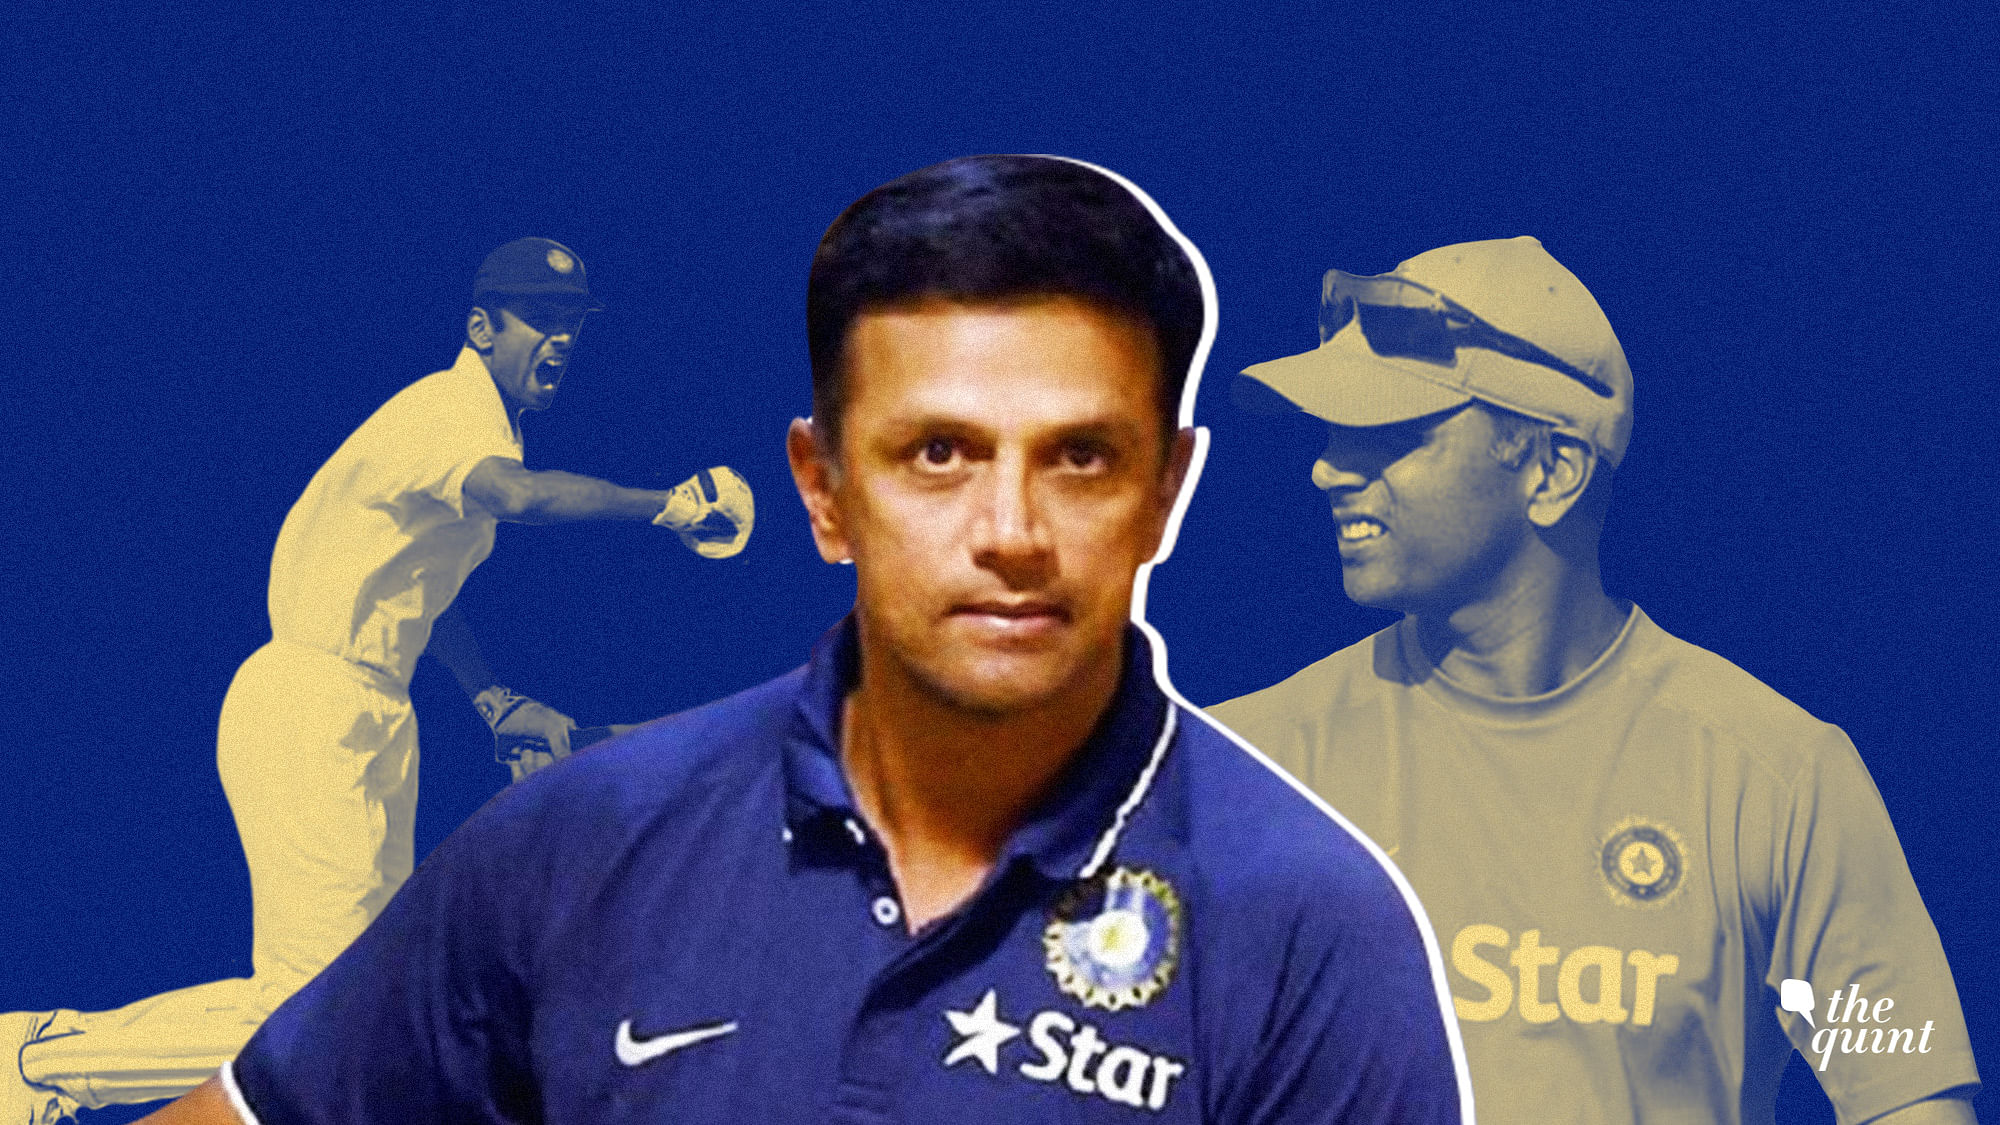 Celebrating Rahul Dravid’s legendary career and contribution to Indian cricket on his 46th birthday.